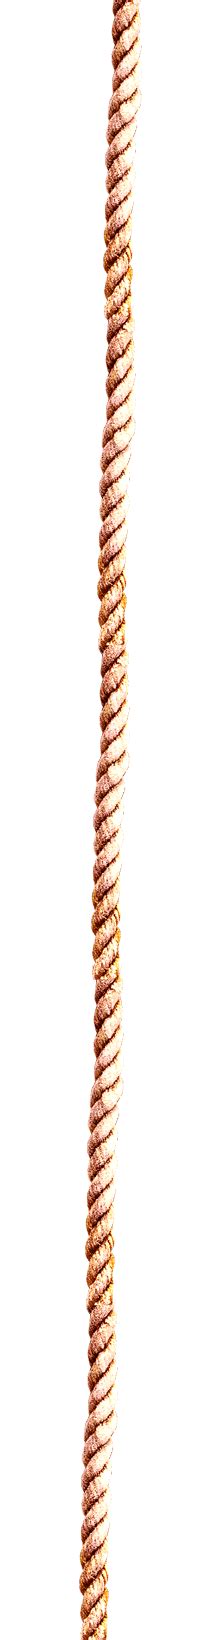 Collection Of Rope Hd Png Pluspng